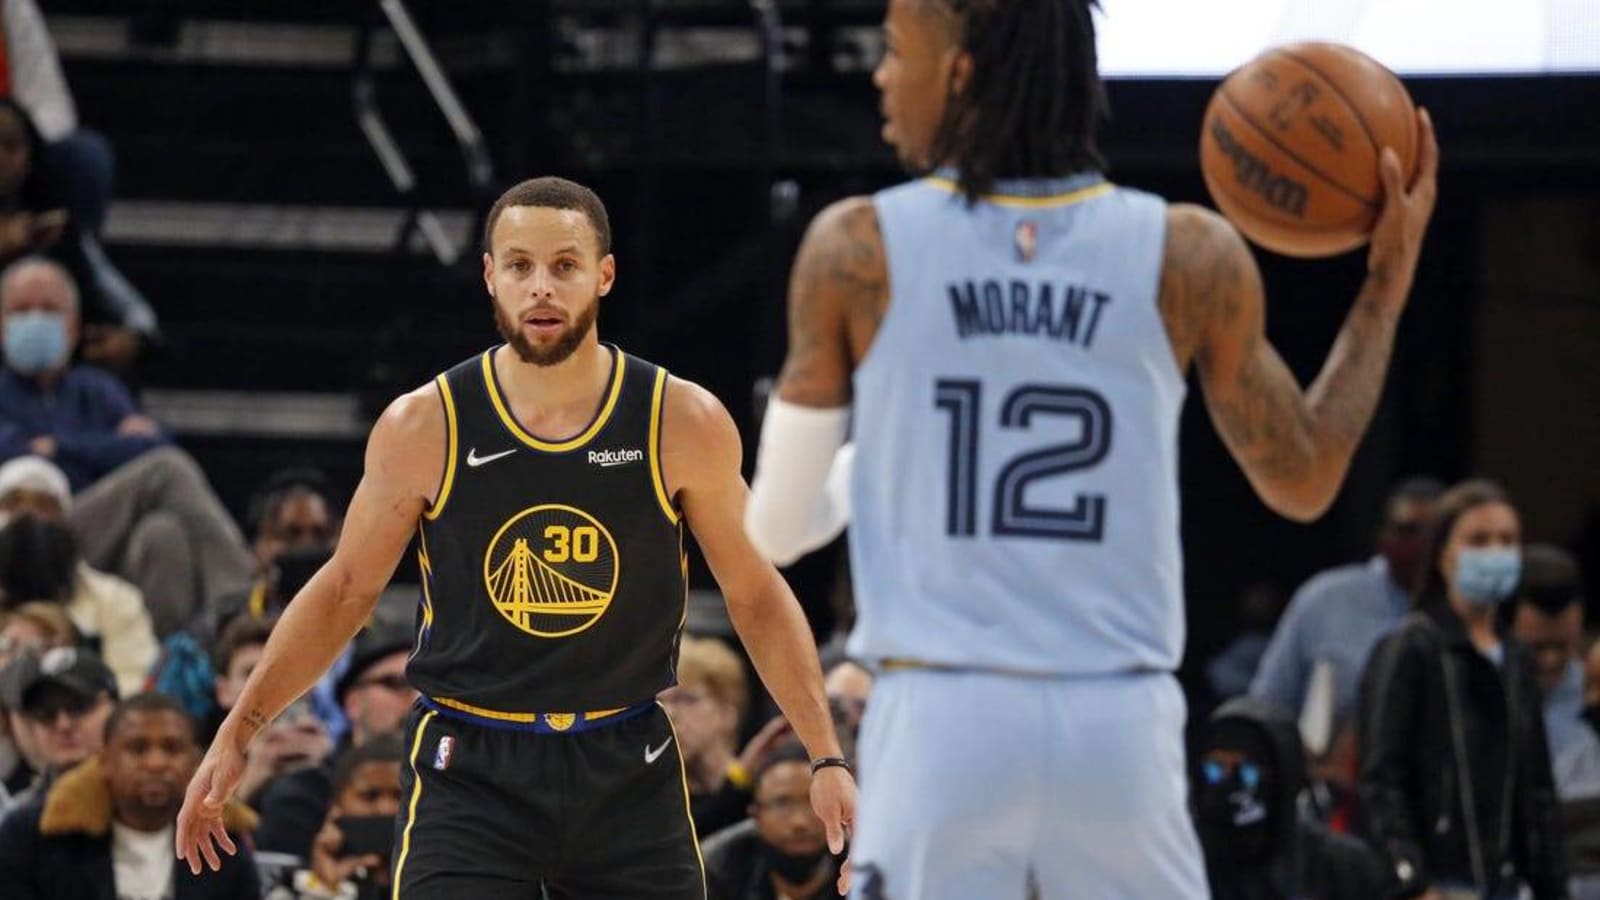 Slumping Grizzlies set for energetic clash with Warriors